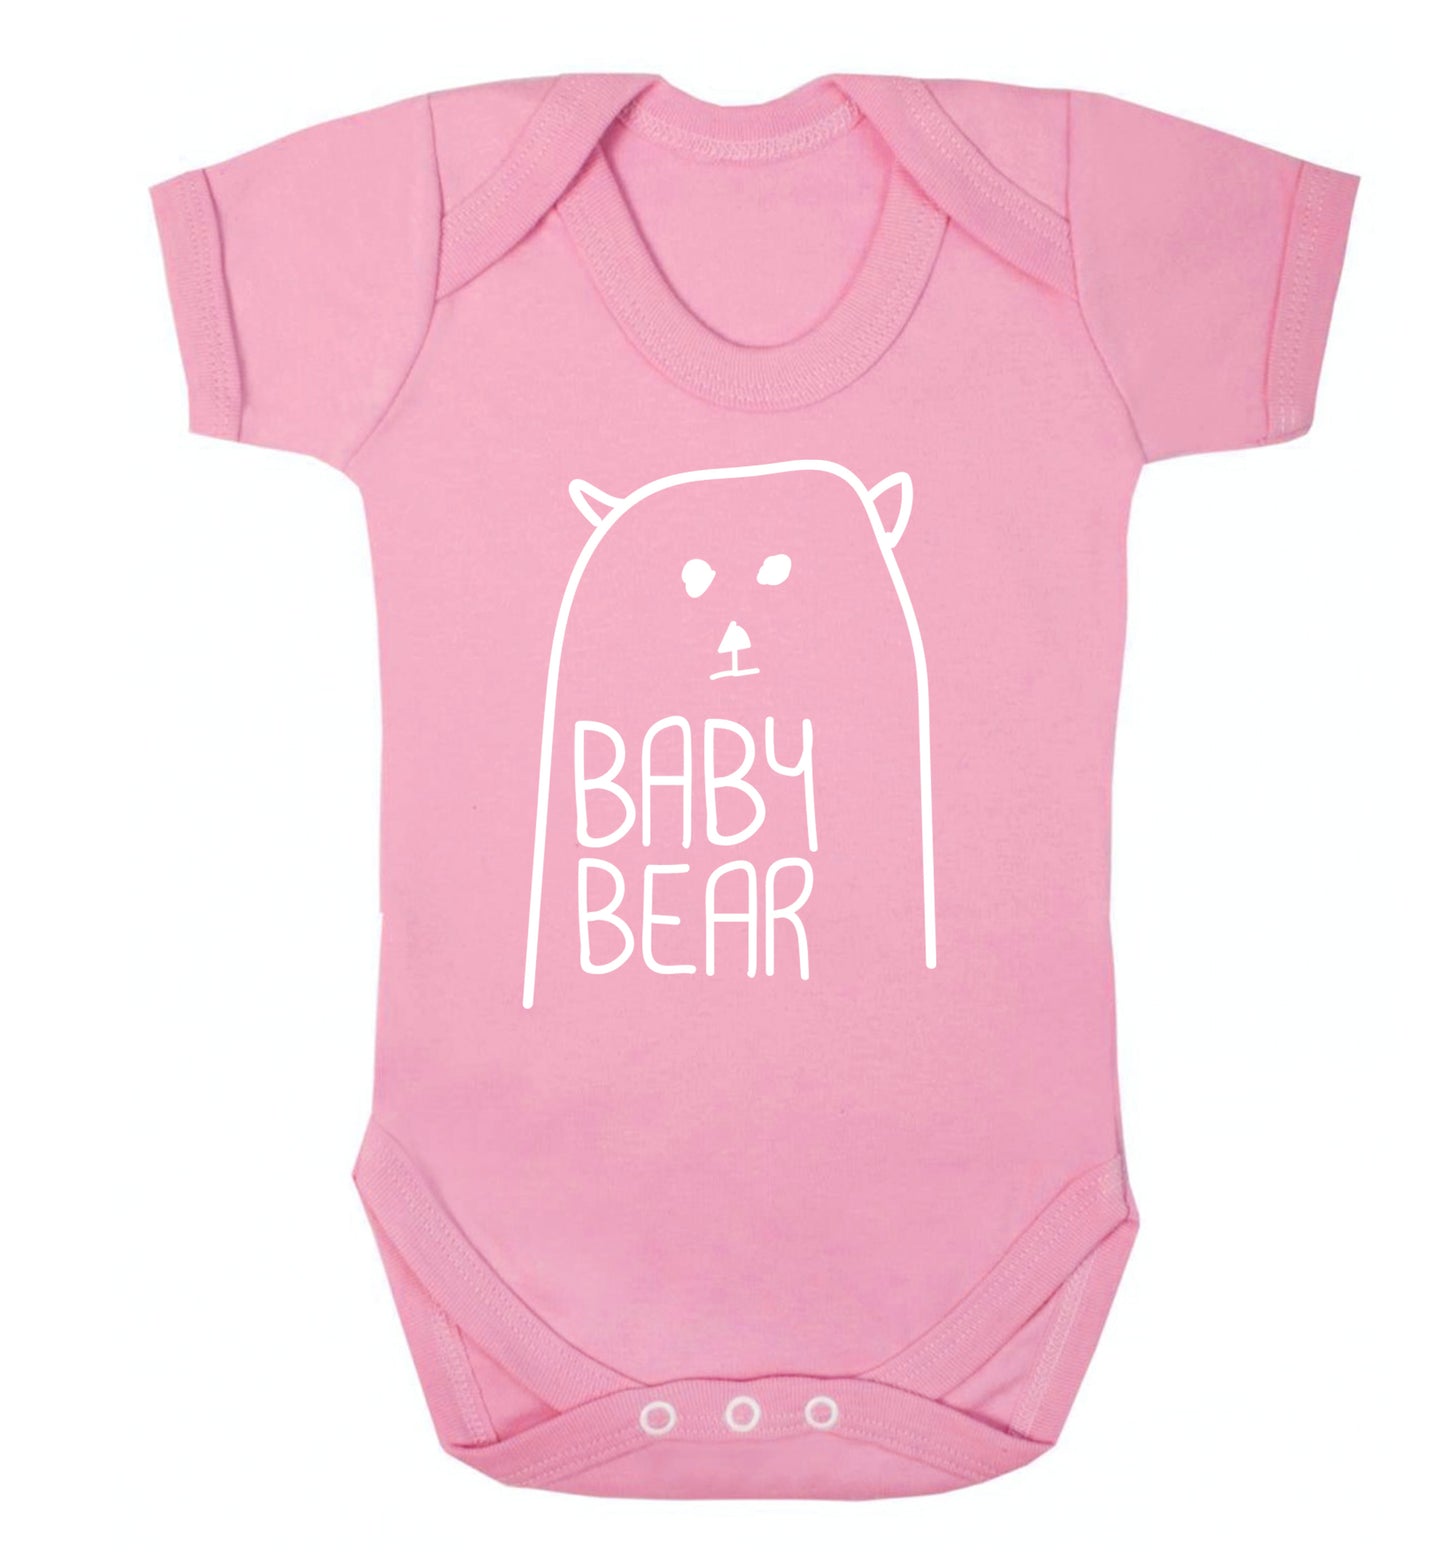 Baby bear Baby Vest pale pink 18-24 months